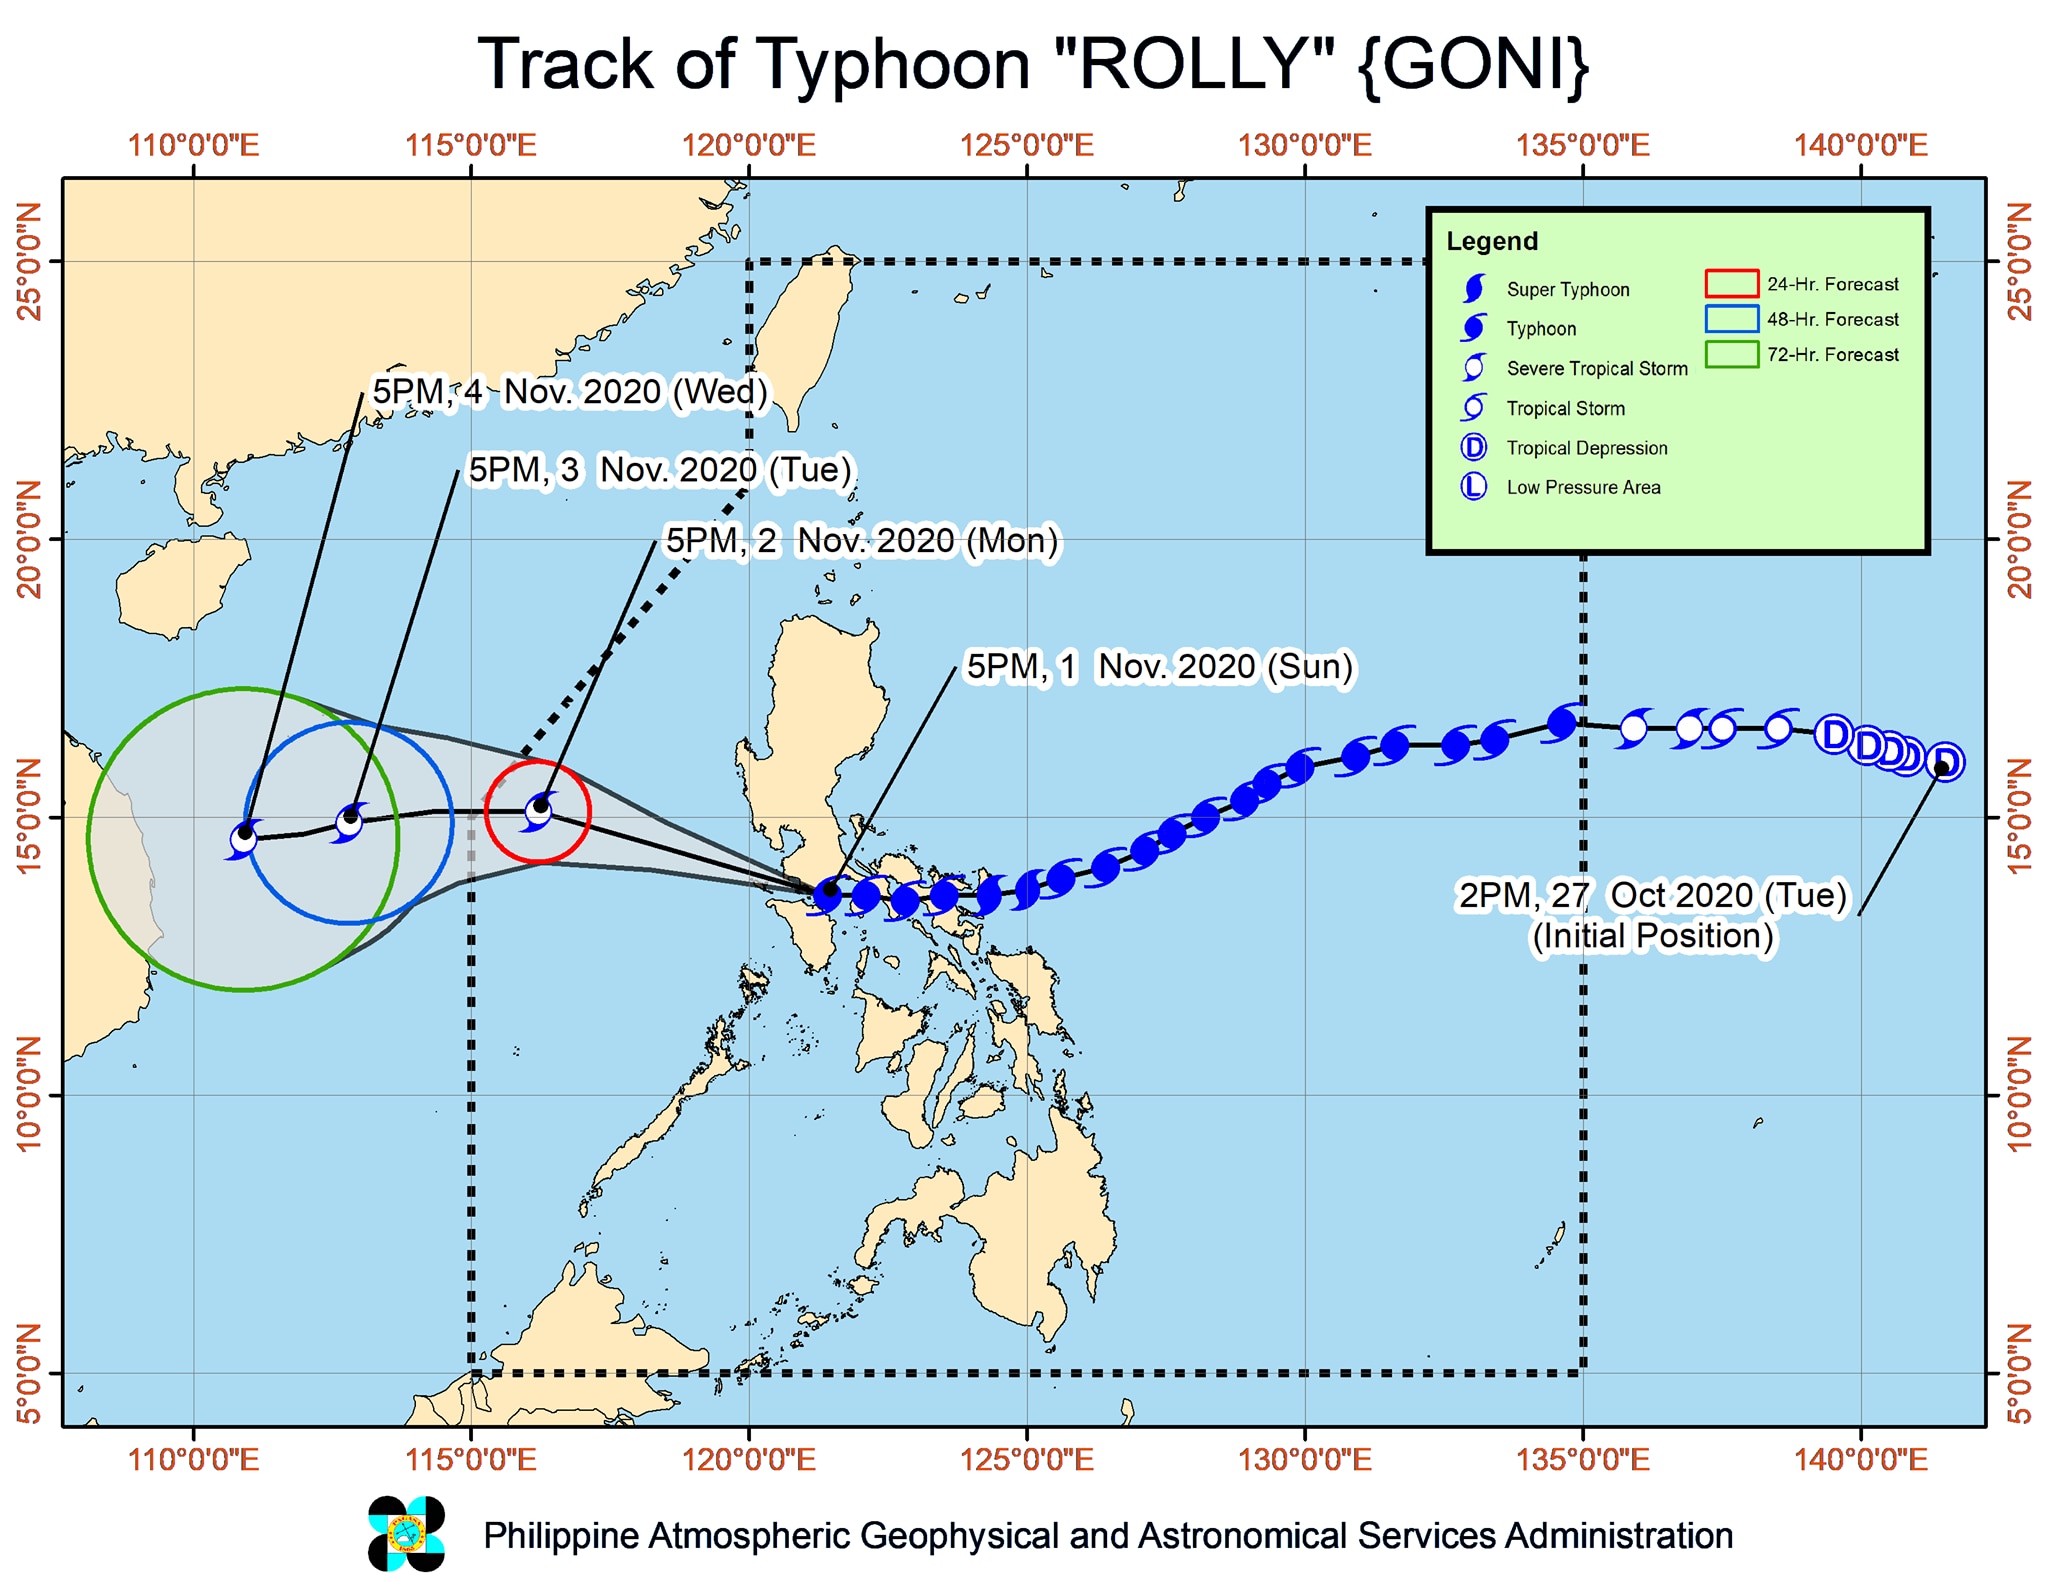 Typhoon Rolly weakens further as it exits Luzon landmass 2